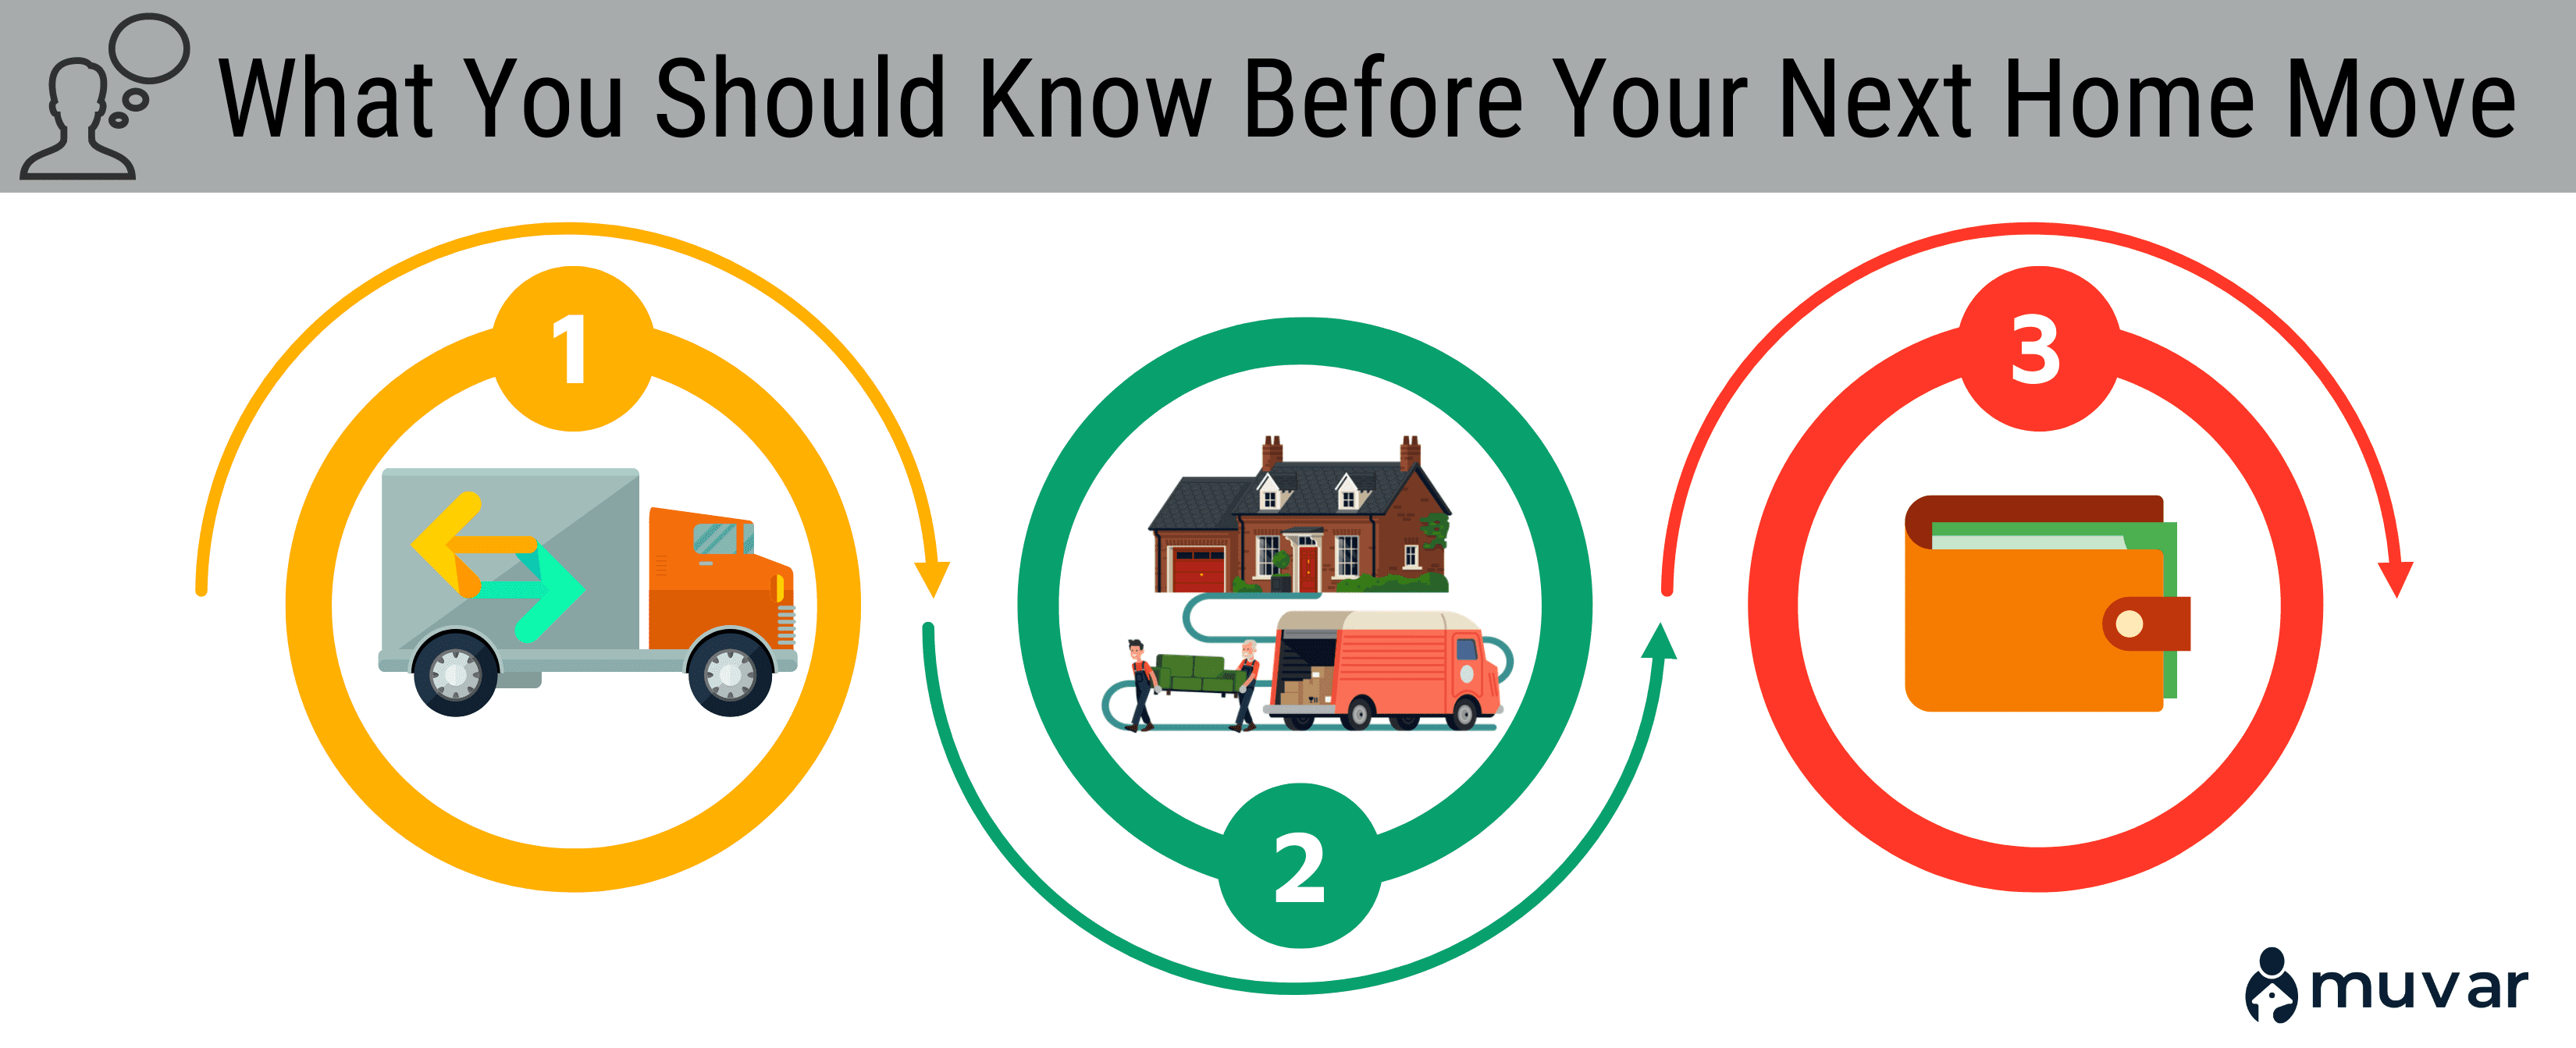 What to Know Before Your Next Home Move
